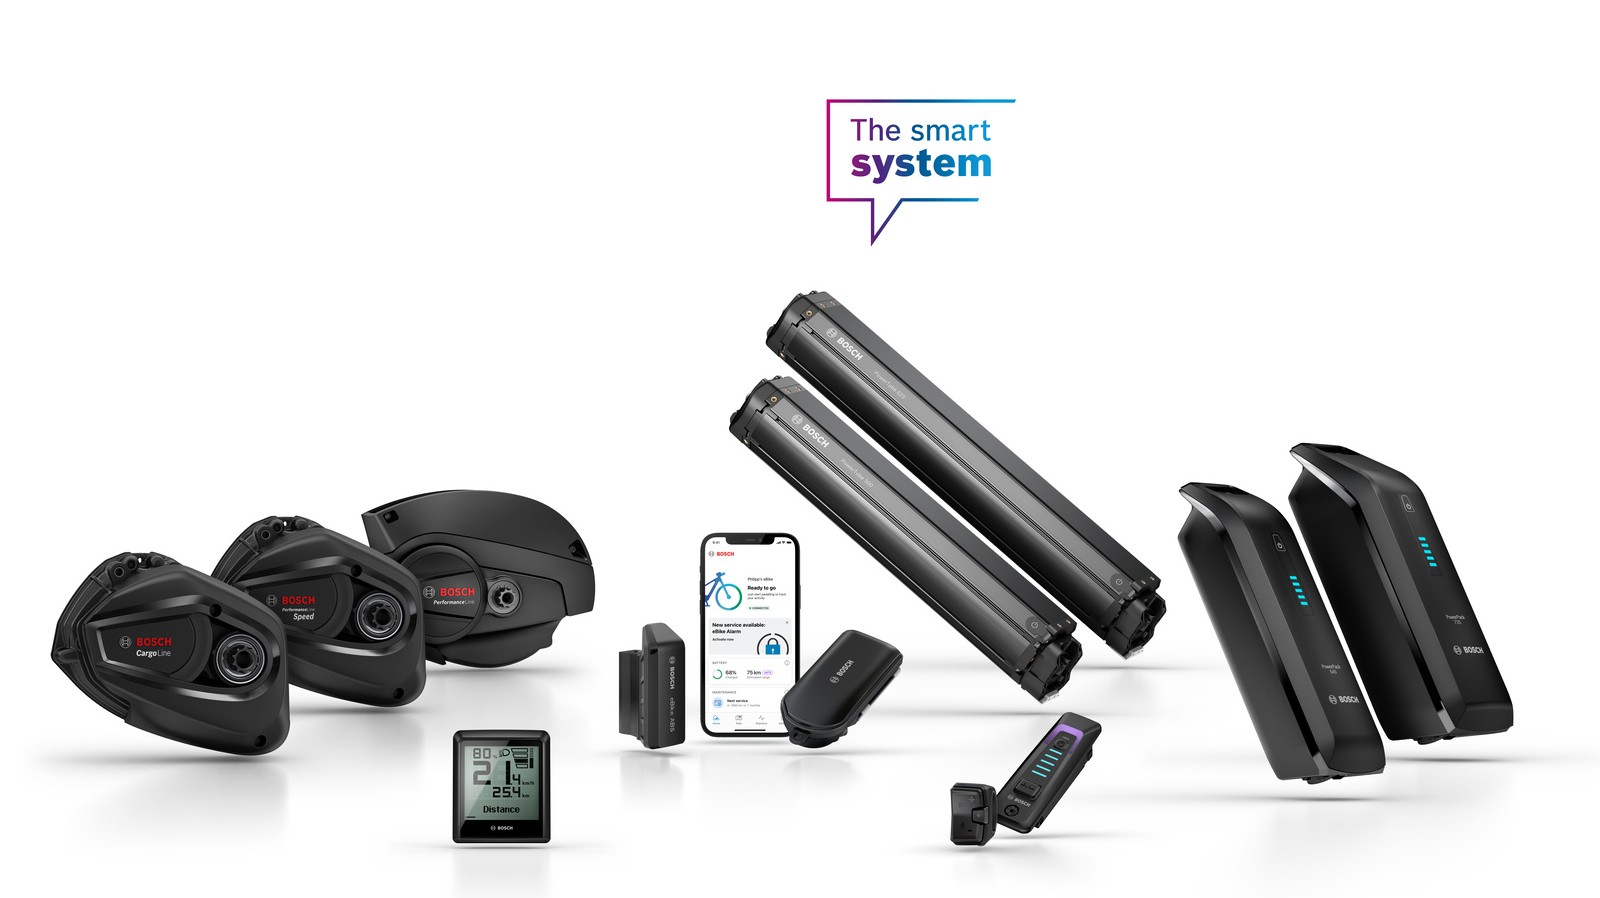 Bosch eBike Systems adds new products and features to the smart system portfolio in model year 2023.